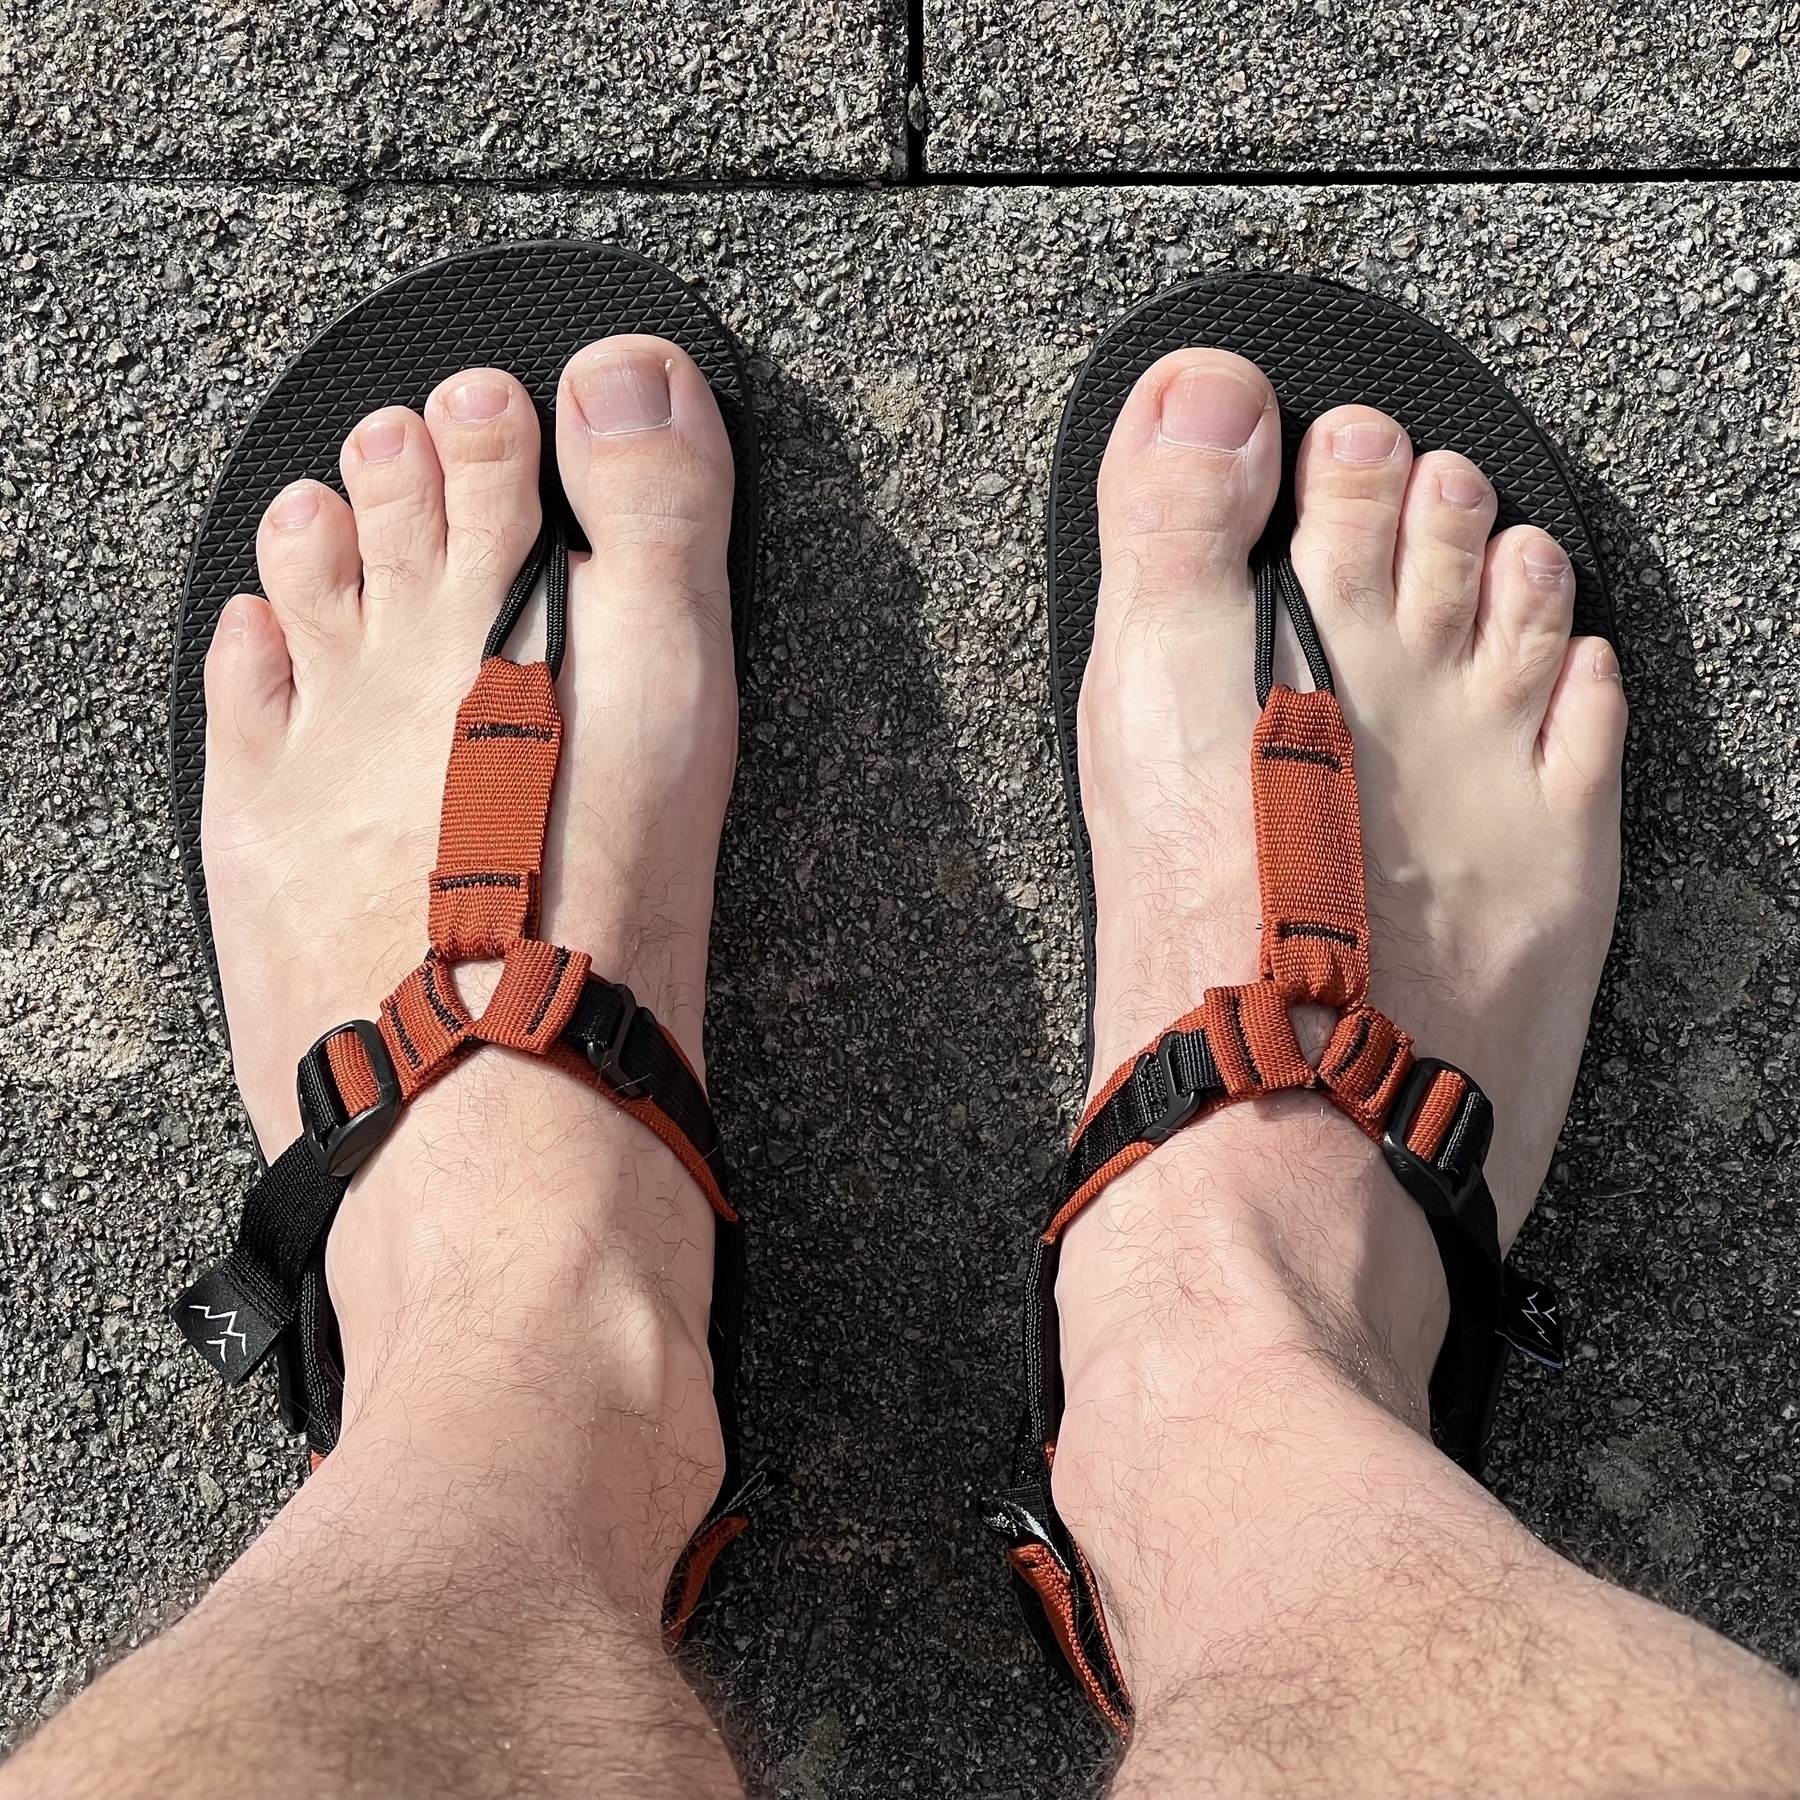 Top down photograph of hairy feet in sandals with a toe separator on top of concrete paving stones. 